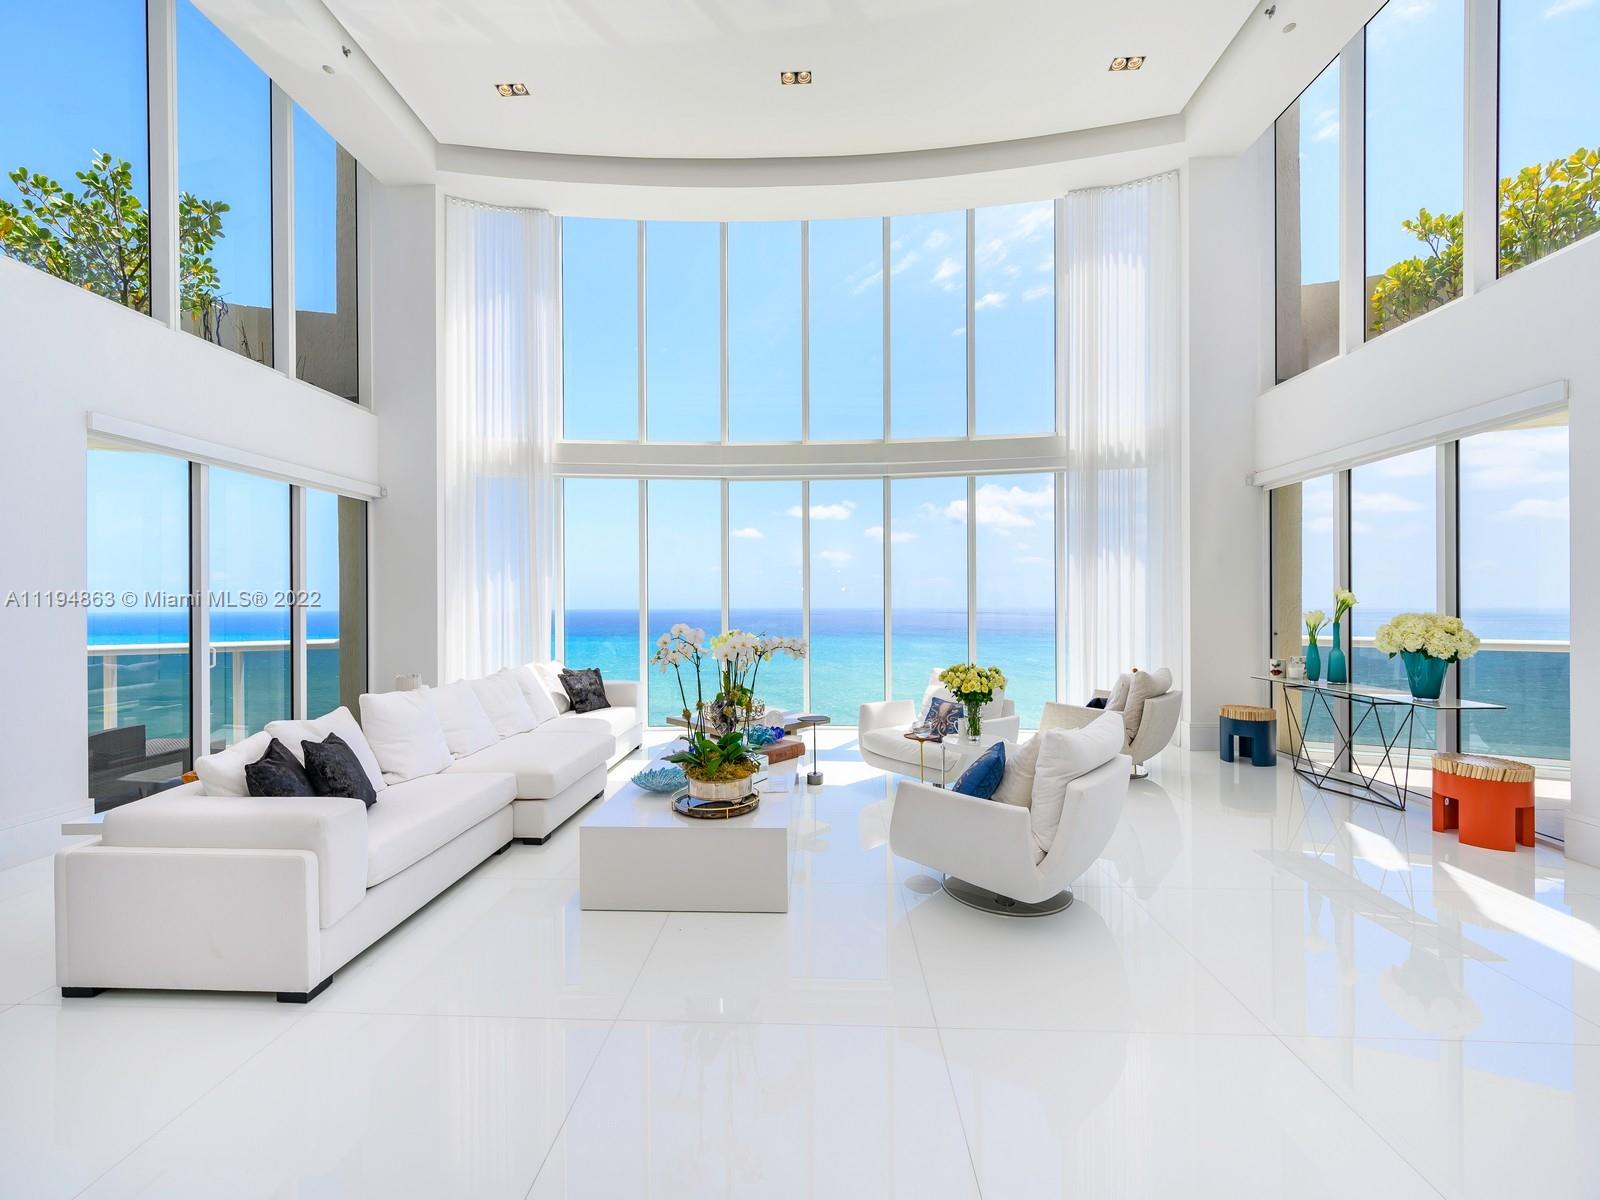 This FULLY FURNISHED unit is surrounded by 180 degree OCEAN VIEWS and private elevator entry, this residence is the ultimate beachfront retreat with the most expansive floorplan available. This 5,901 SF 2 story fully remodeled penthouse offers 6 beds, 6.5 baths and 4 balconies to the north and south. Bright interiors, porcelain floors throughout and floor to ceiling windows. Creston smart home system, modern updated kitchen overlooks the ocean with top-of-the-line Miele appliances including electric double oven and stove, subzero fridge, and granite countertops. Full-service luxury building amenities with resort-style rooftop, hot-tub, top-tier gym, restaurant, private beach service, tennis court, security, massage room, and more! Unit includes 4 parking spaces and storage space.